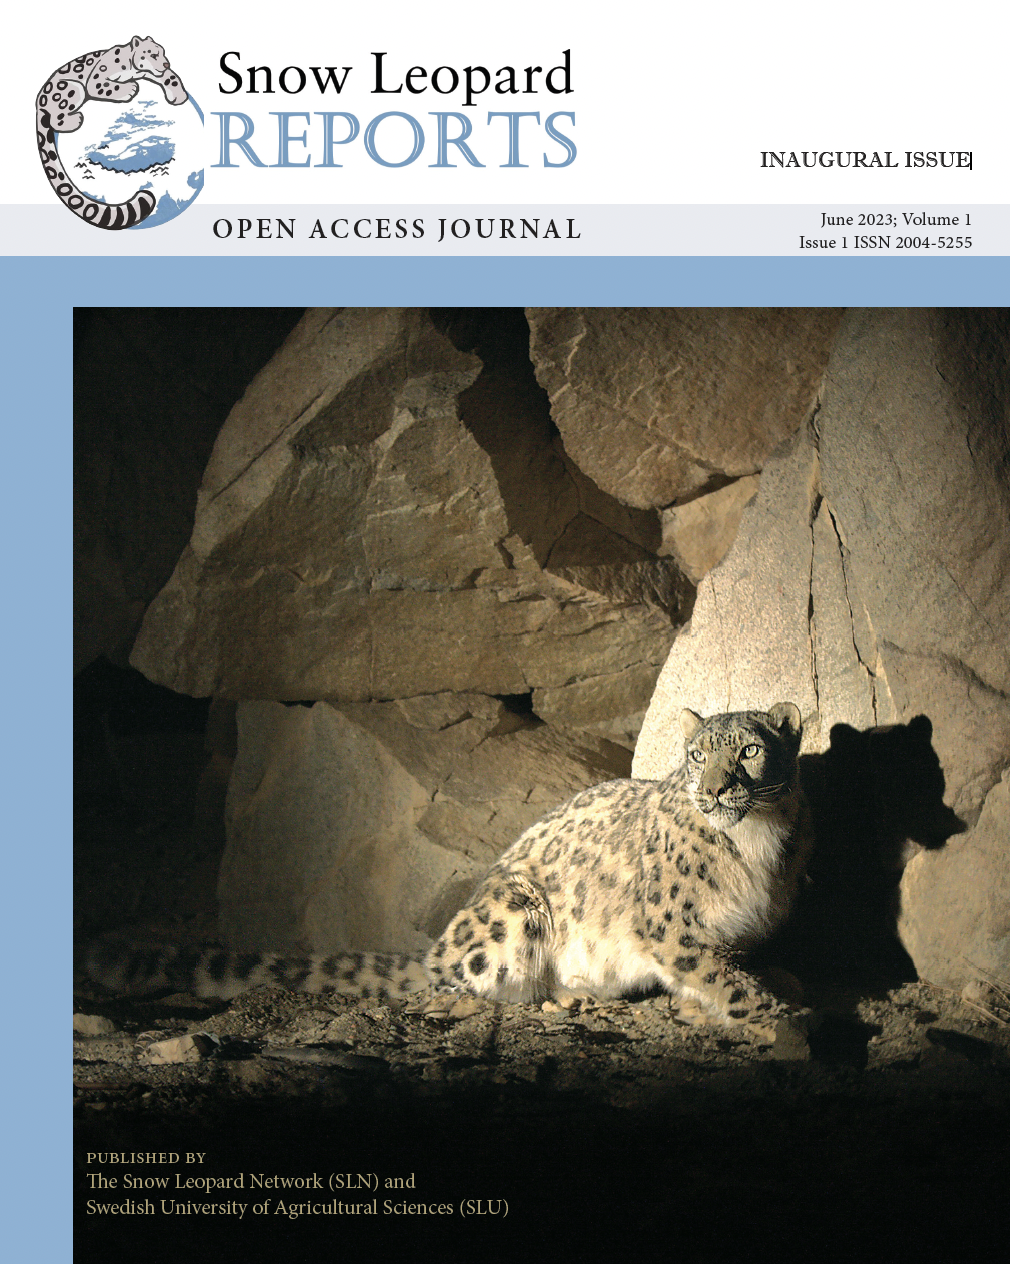 Cover Photo: A snow leopard female photographed at night by Ben Morlang Design and layout: Ritu Topa/arrtcreations@gmail.com